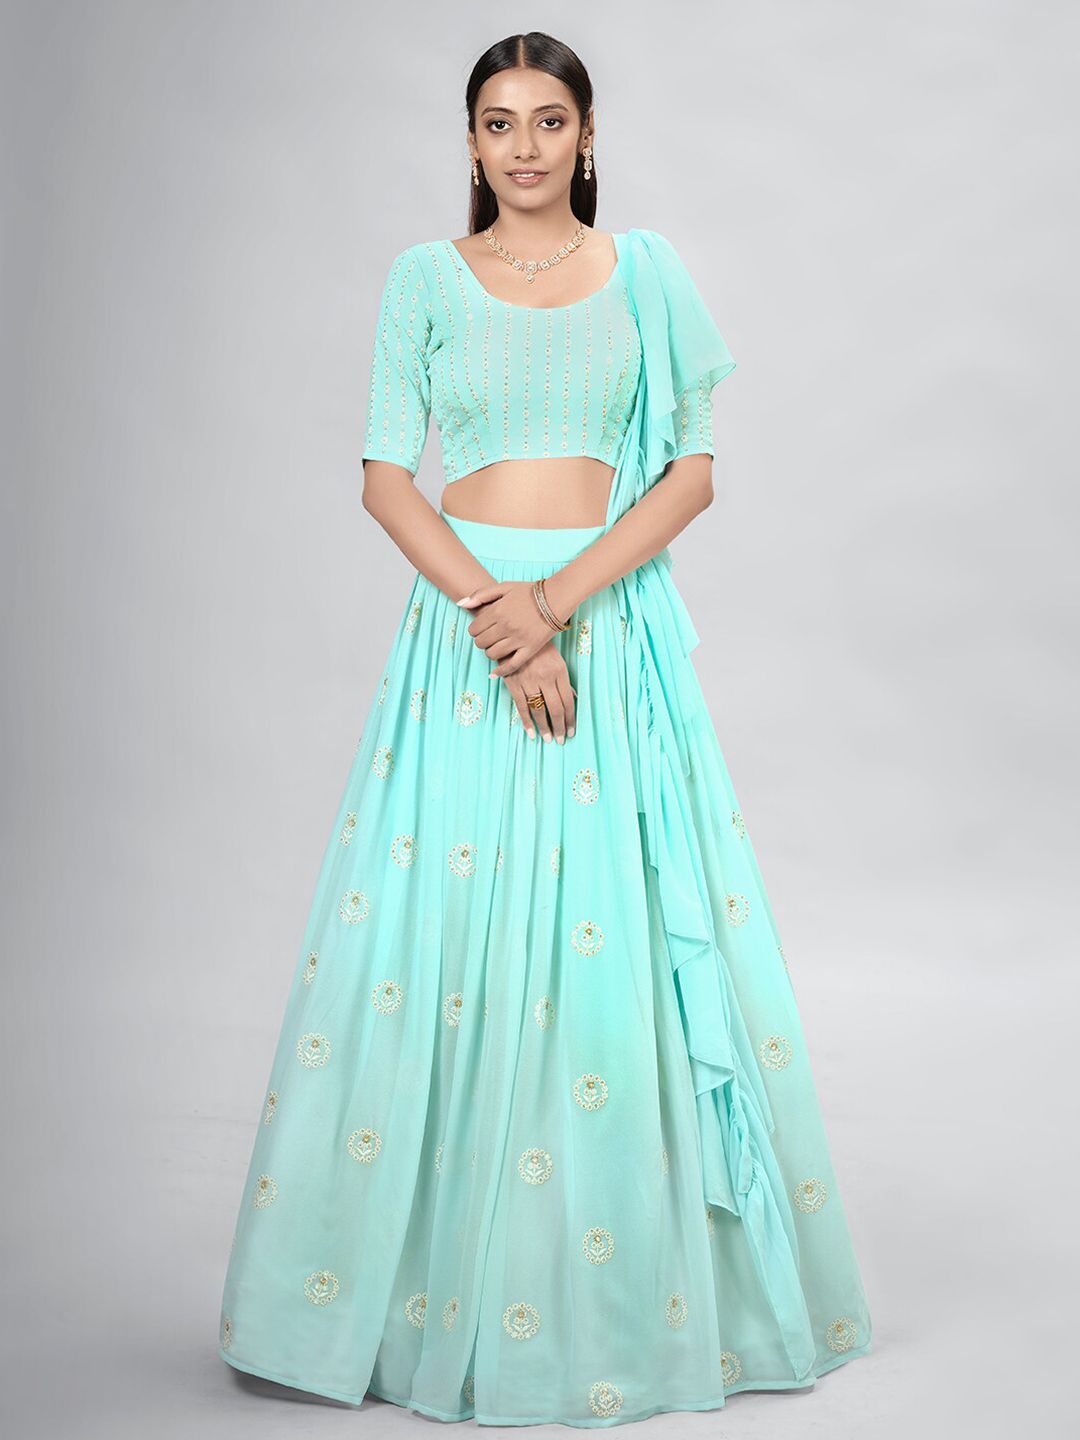 DRESSTIVE Blue & Gold-Toned Embroidered Thread Work Semi-Stitched Lehenga & Unstitched Blouse With Dupatta Price in India